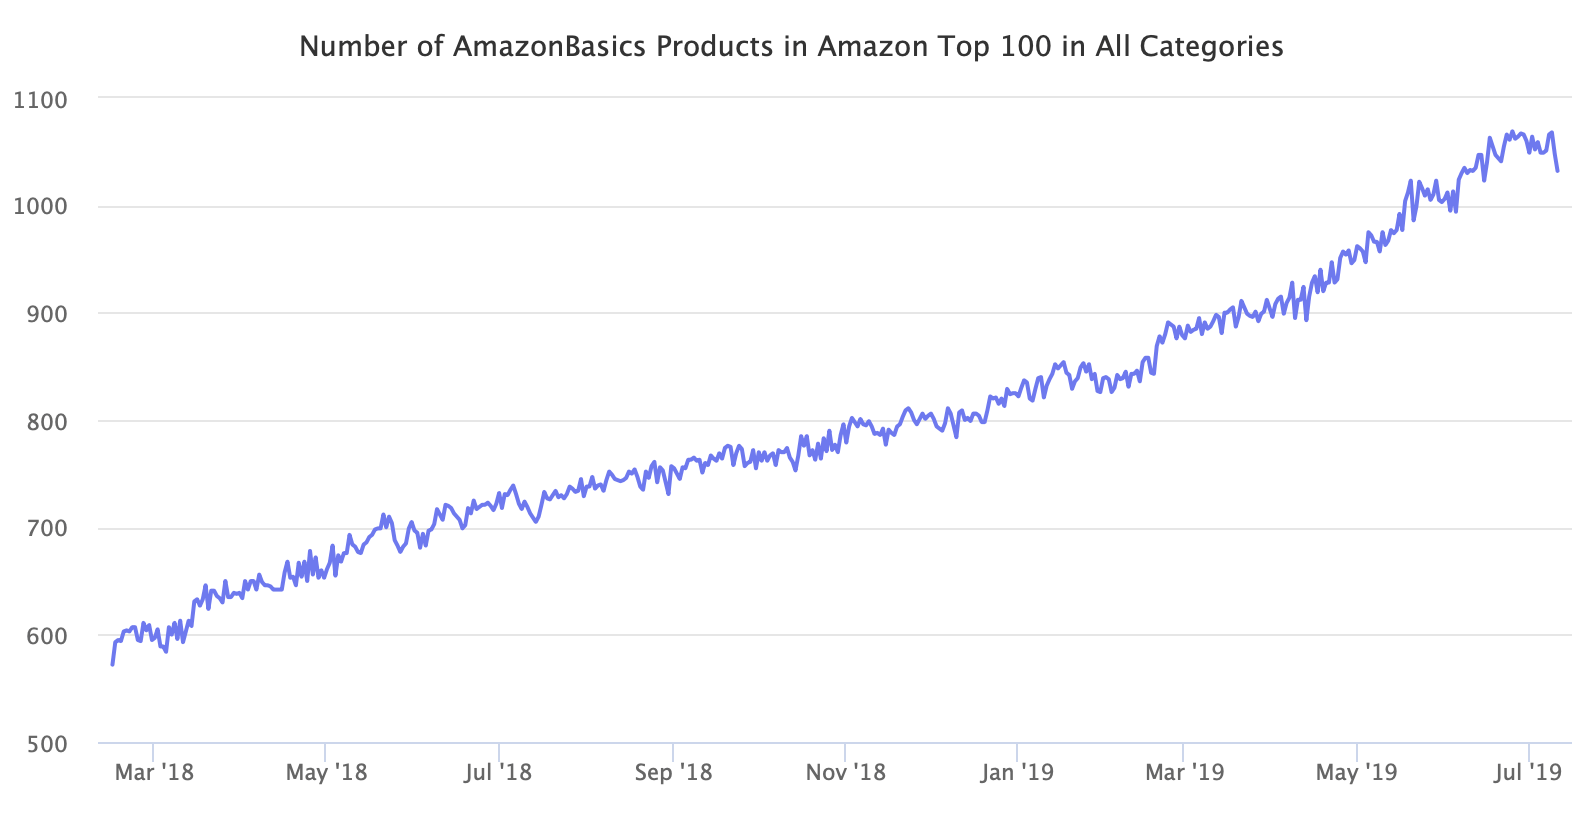 Number of AmazonBasics Products in Amazon Top 100 in All Categories